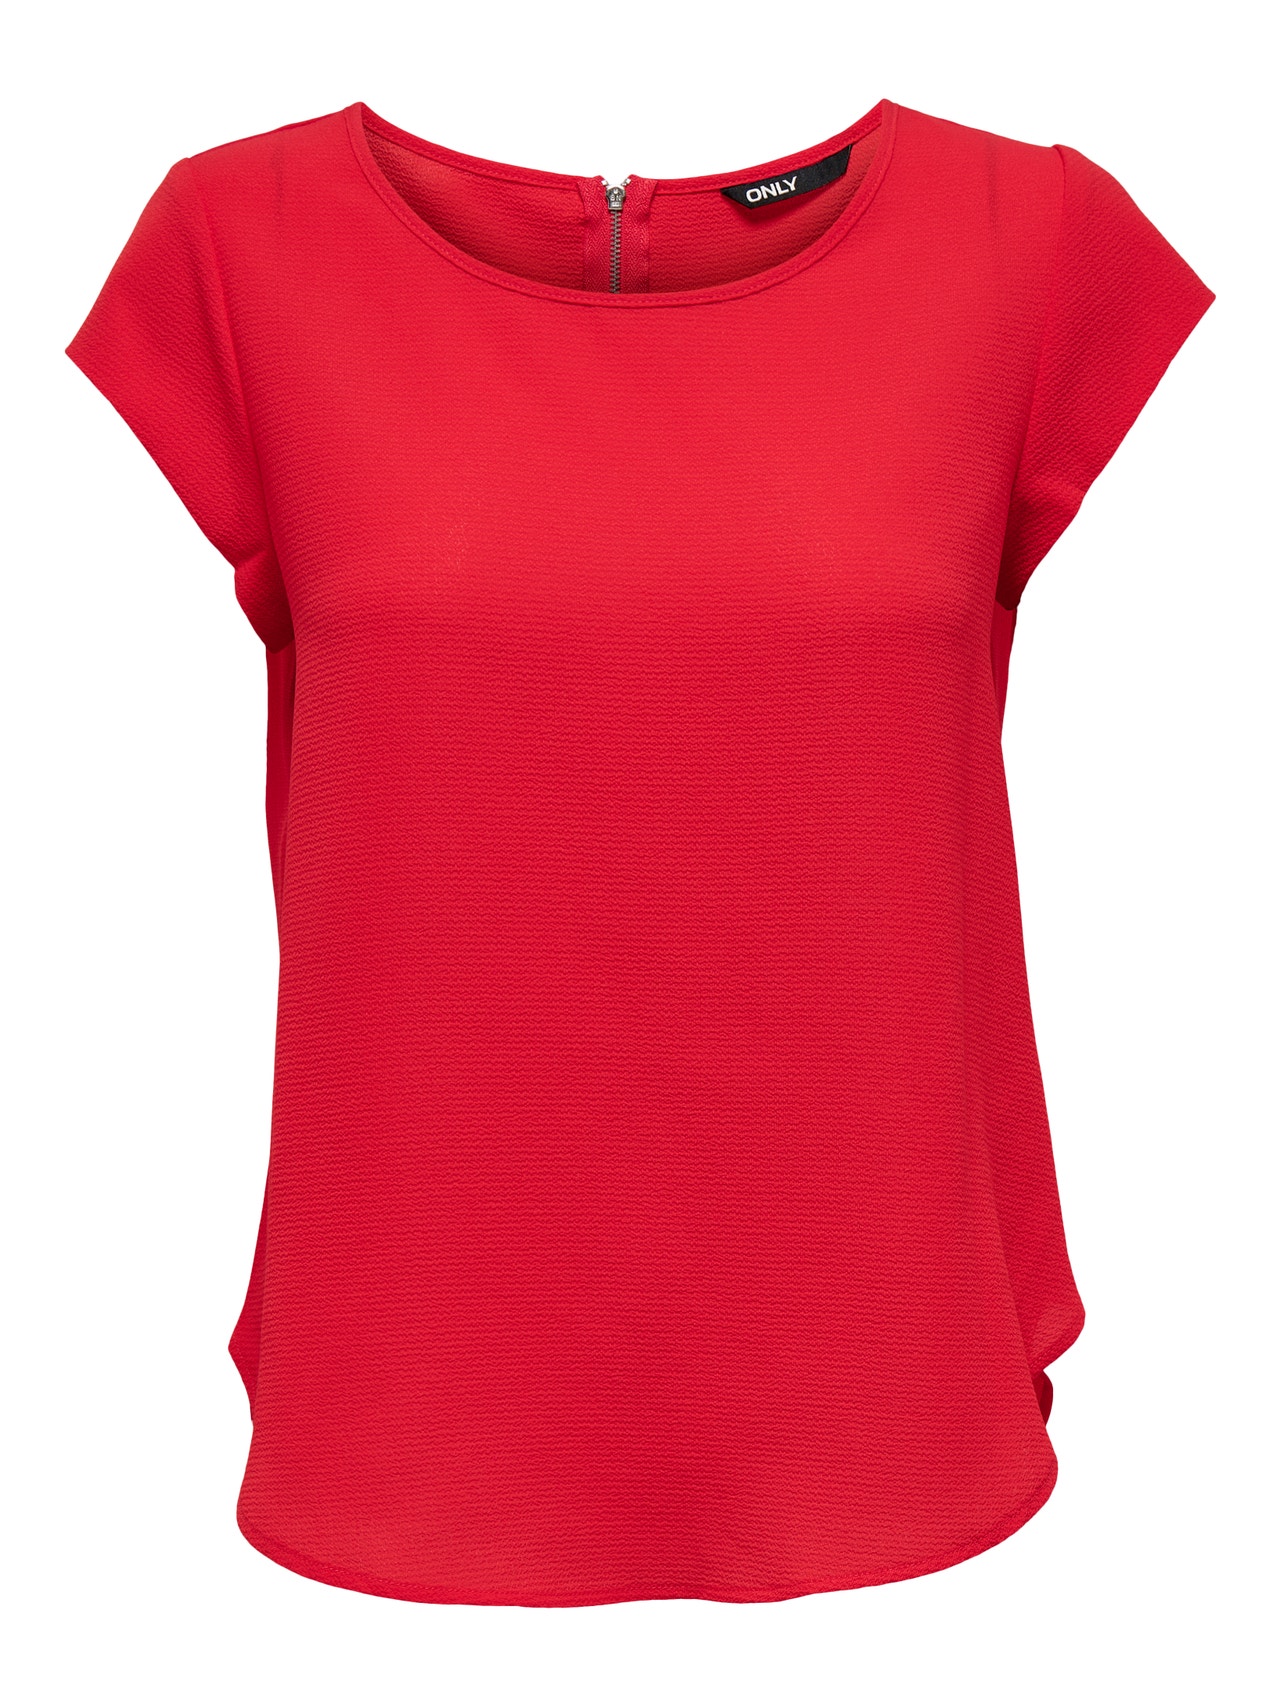 ONLY Loose Short Sleeved Top -High Risk Red - 15142784